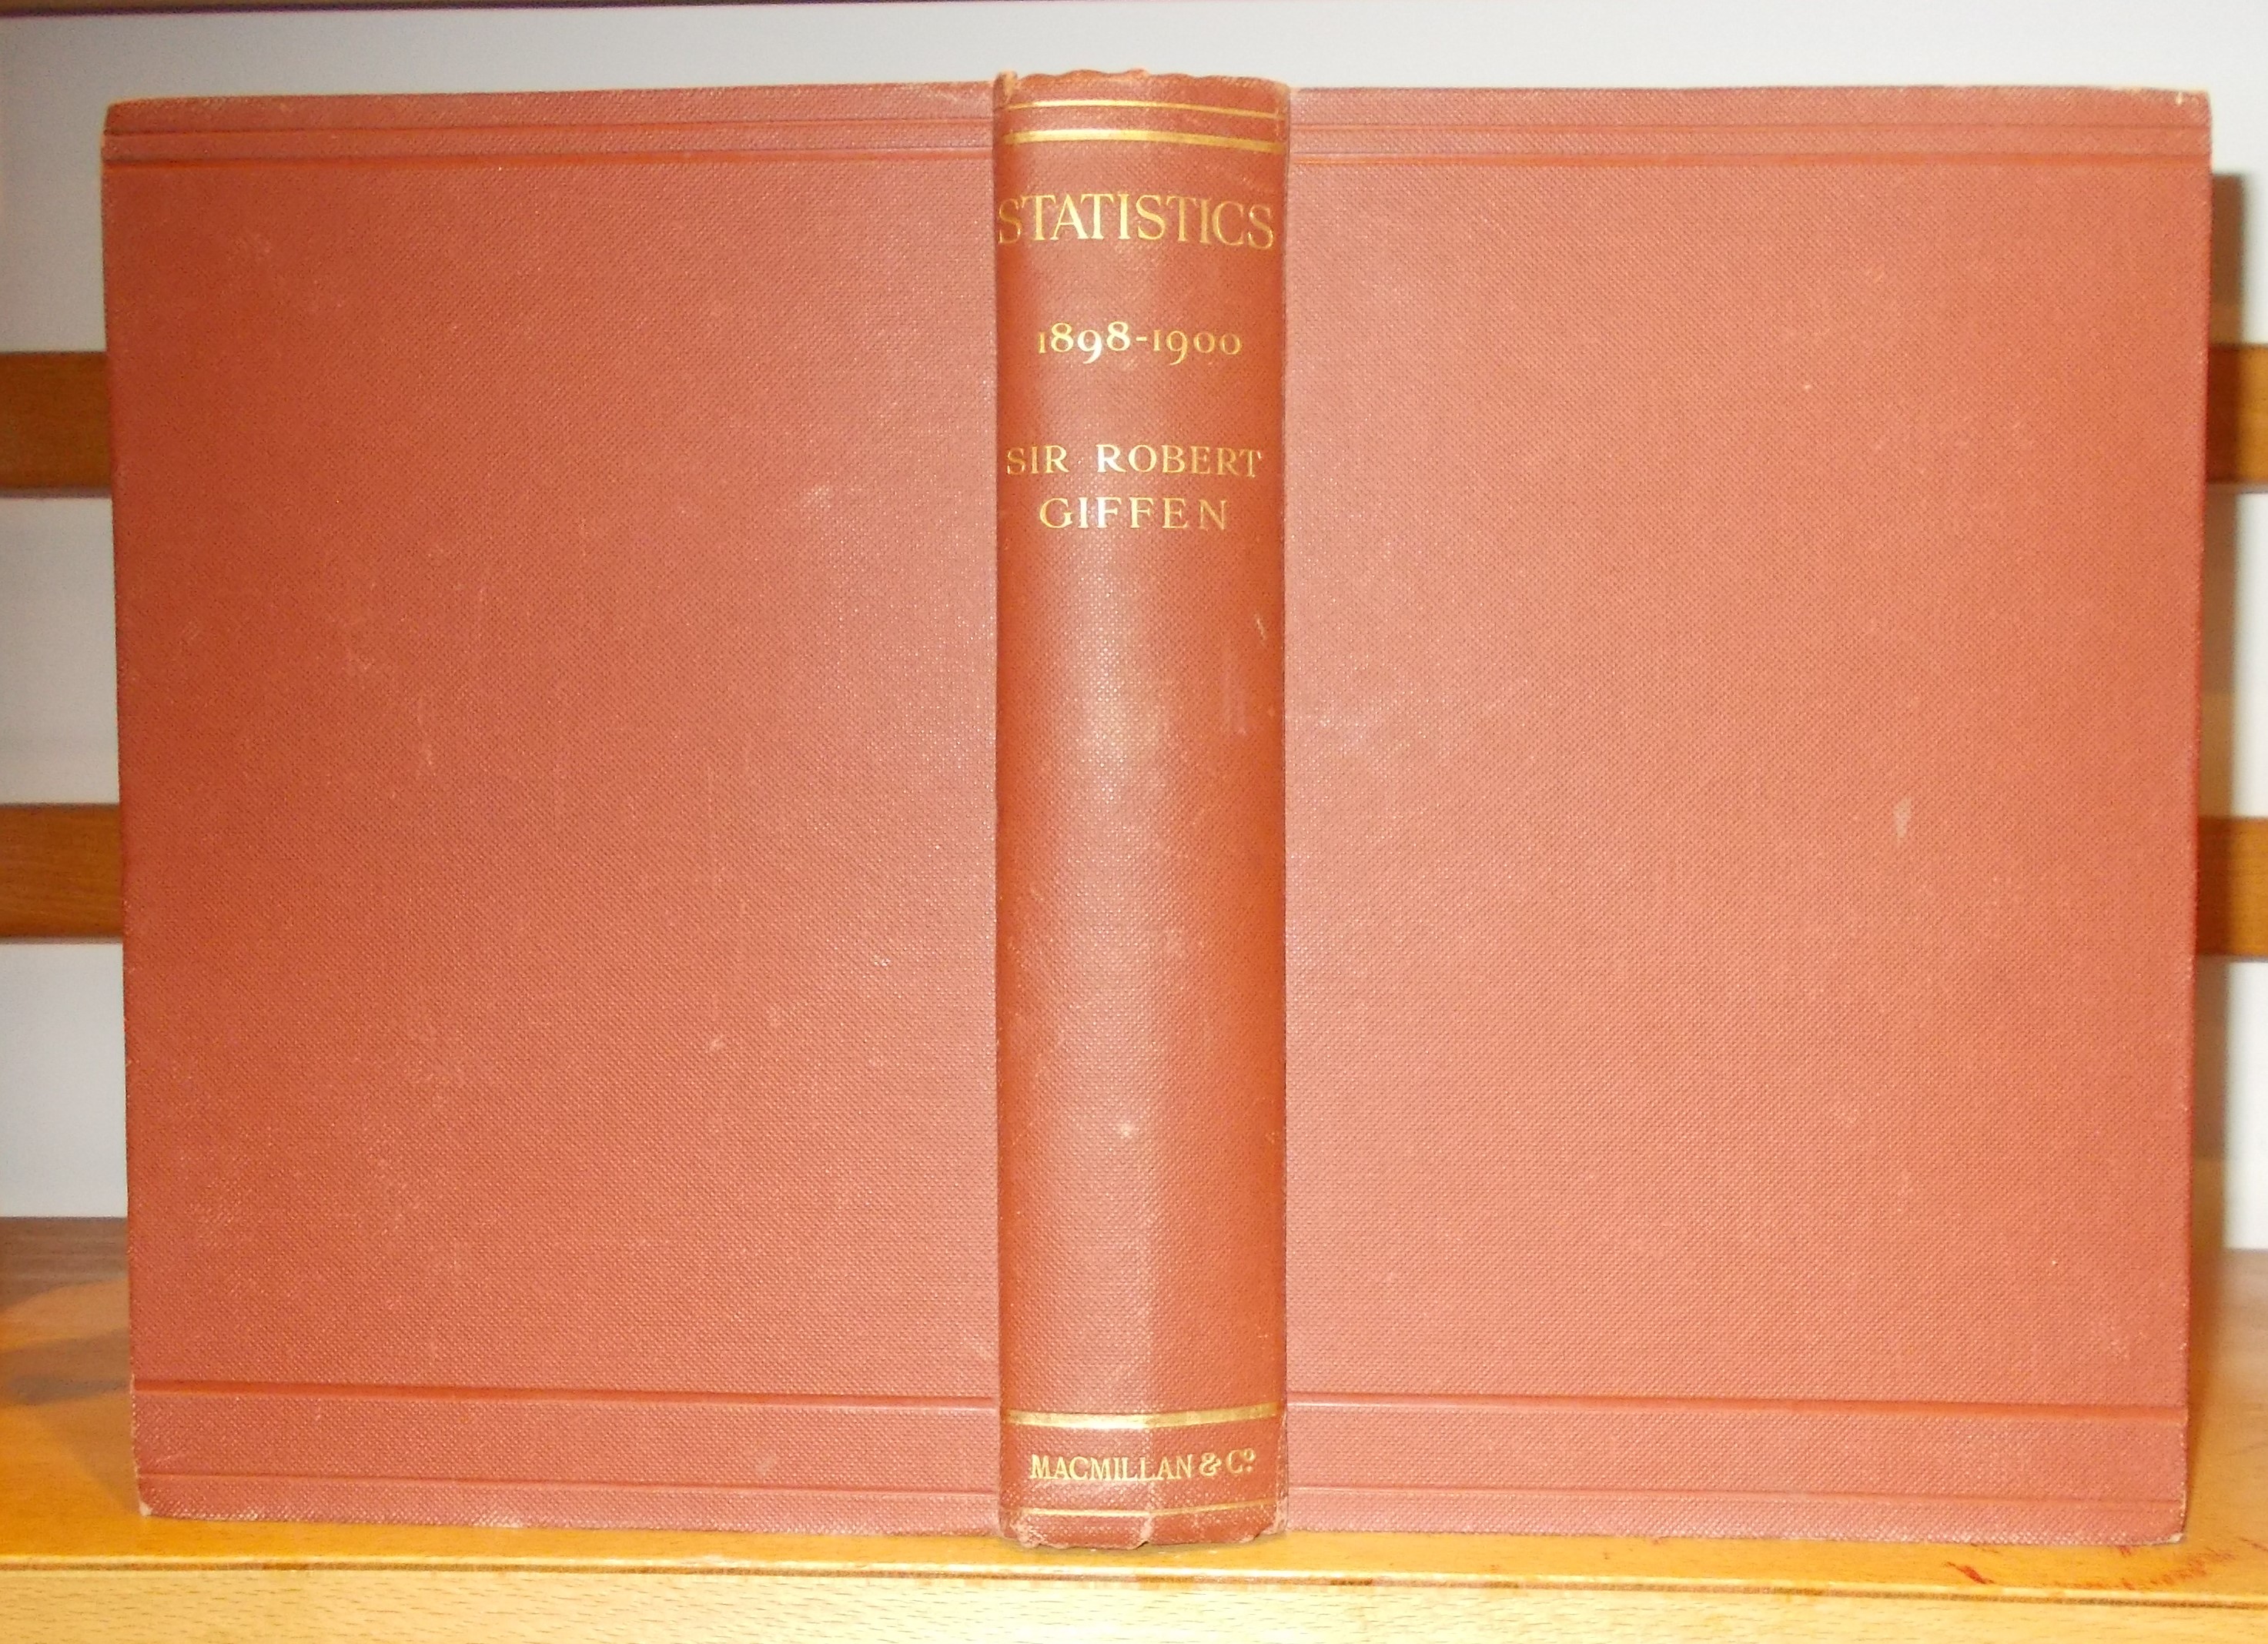 Image for Statistics By the Late Sir Robert Giffen K.C.B., LL.D., F.R.S. Written About the Years 1898-1900